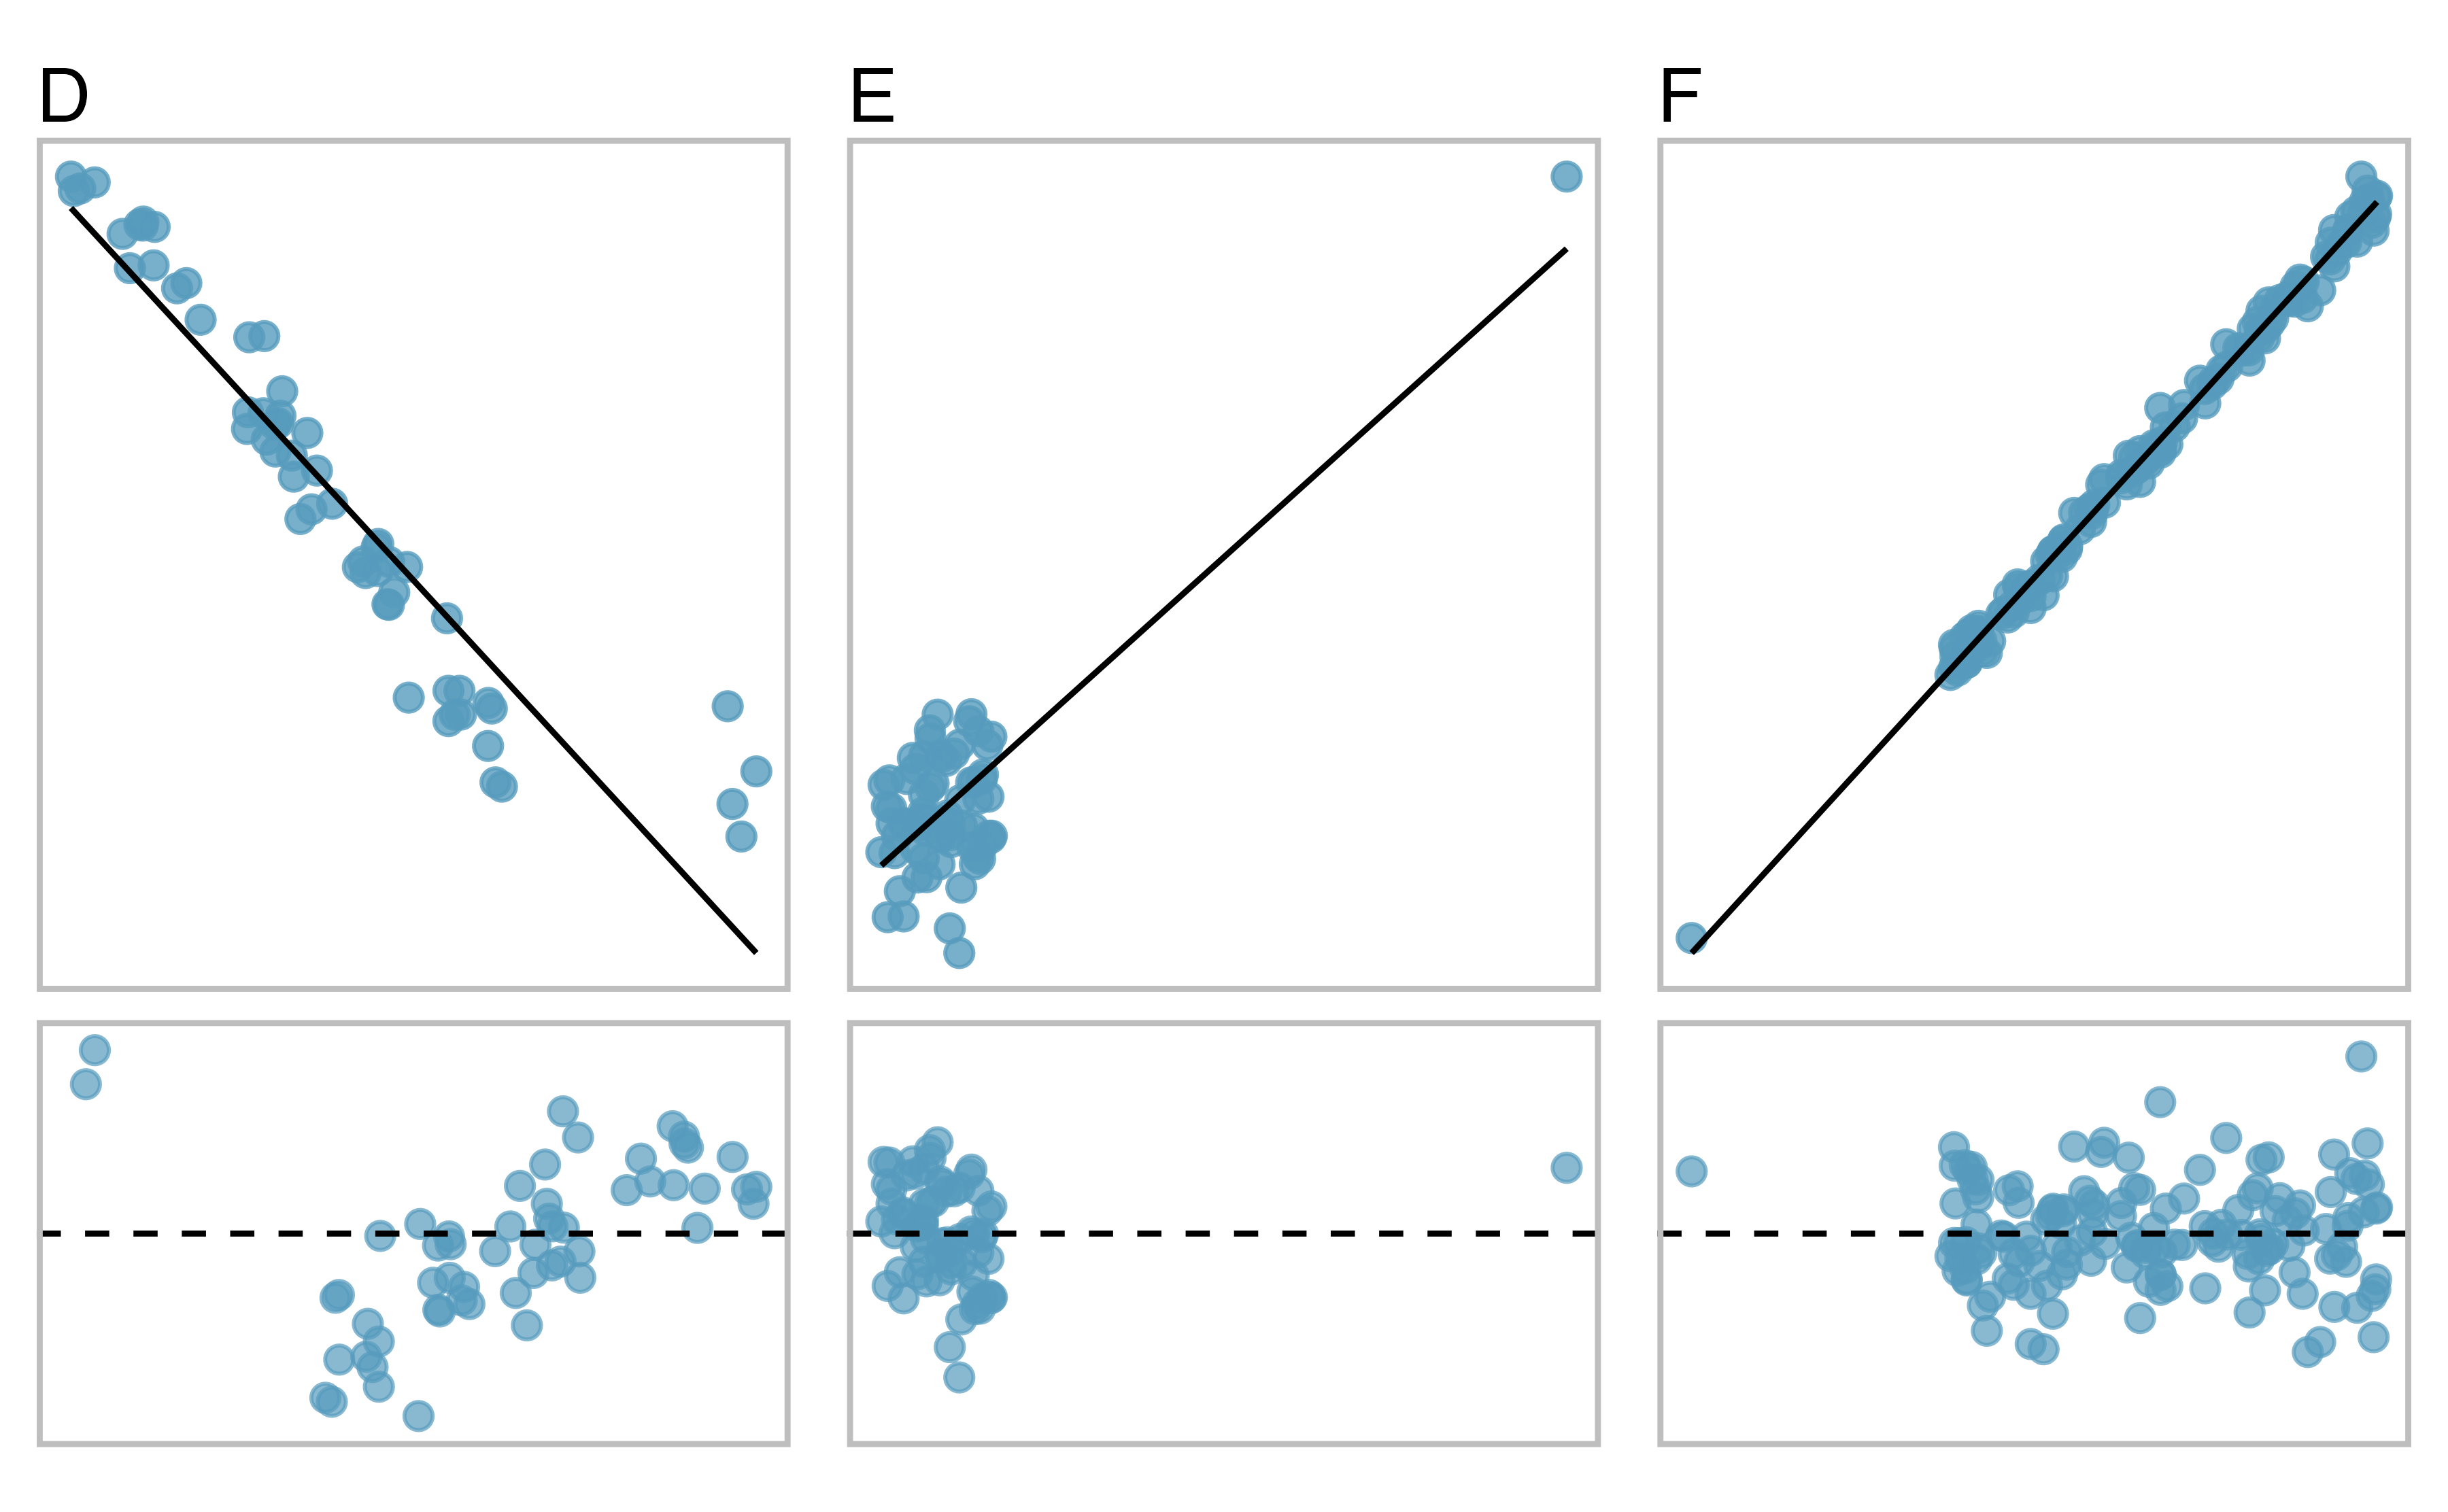 Three plots, each with a least squares line and residual plot. All data sets have at least one outlier.